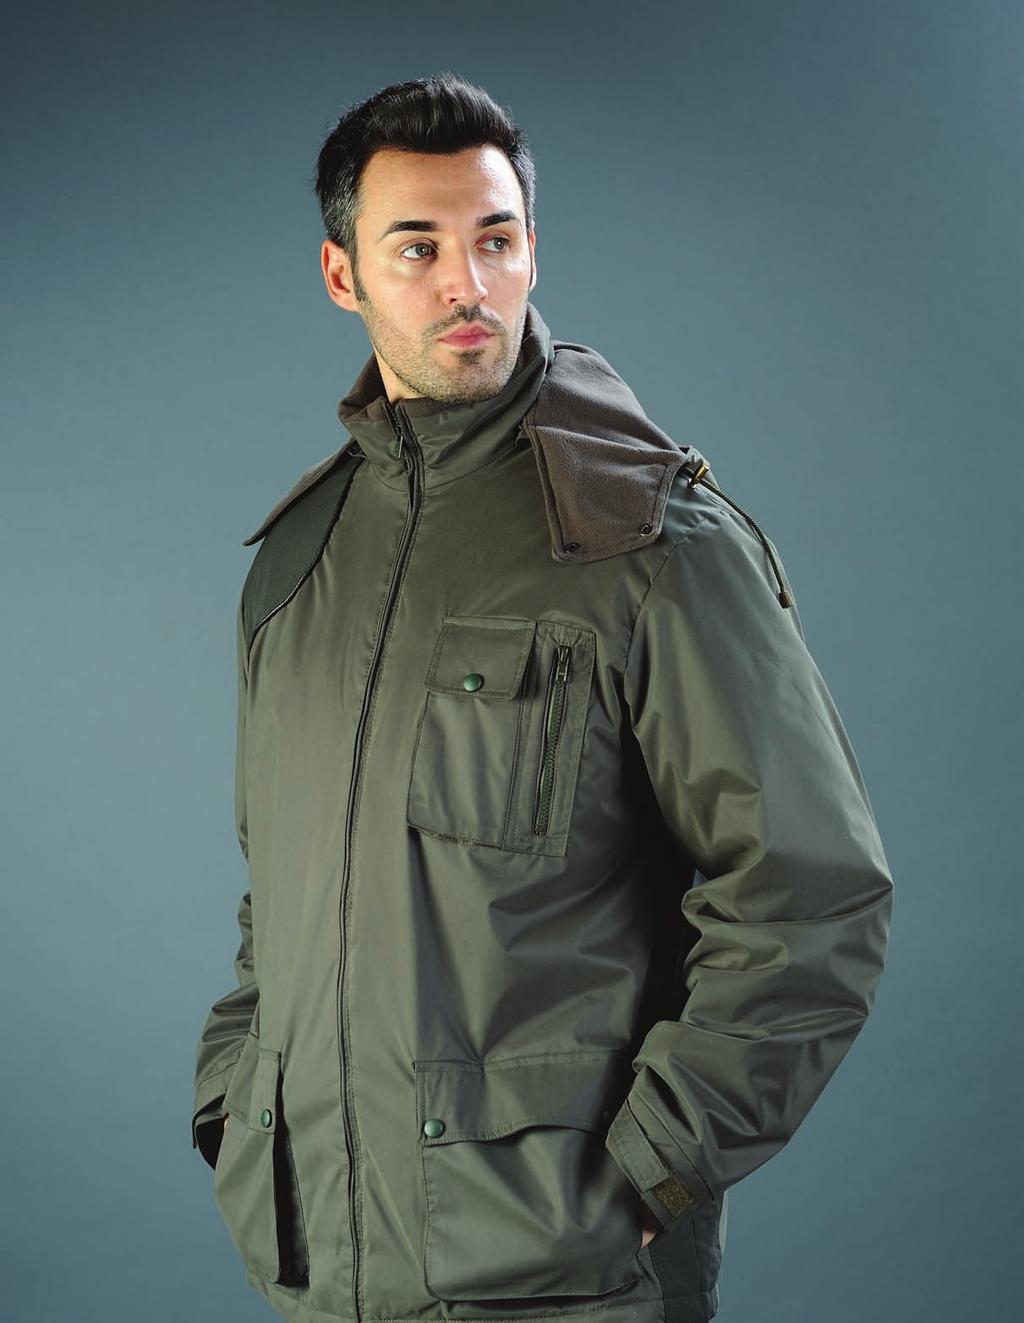 JACKET CODE 10-1102 Functional pockets closed with buttons Shoulder and side areas padded with high resistant fabric Adjustable cuffs Adjustable hem Detachable hood with zip WINTER